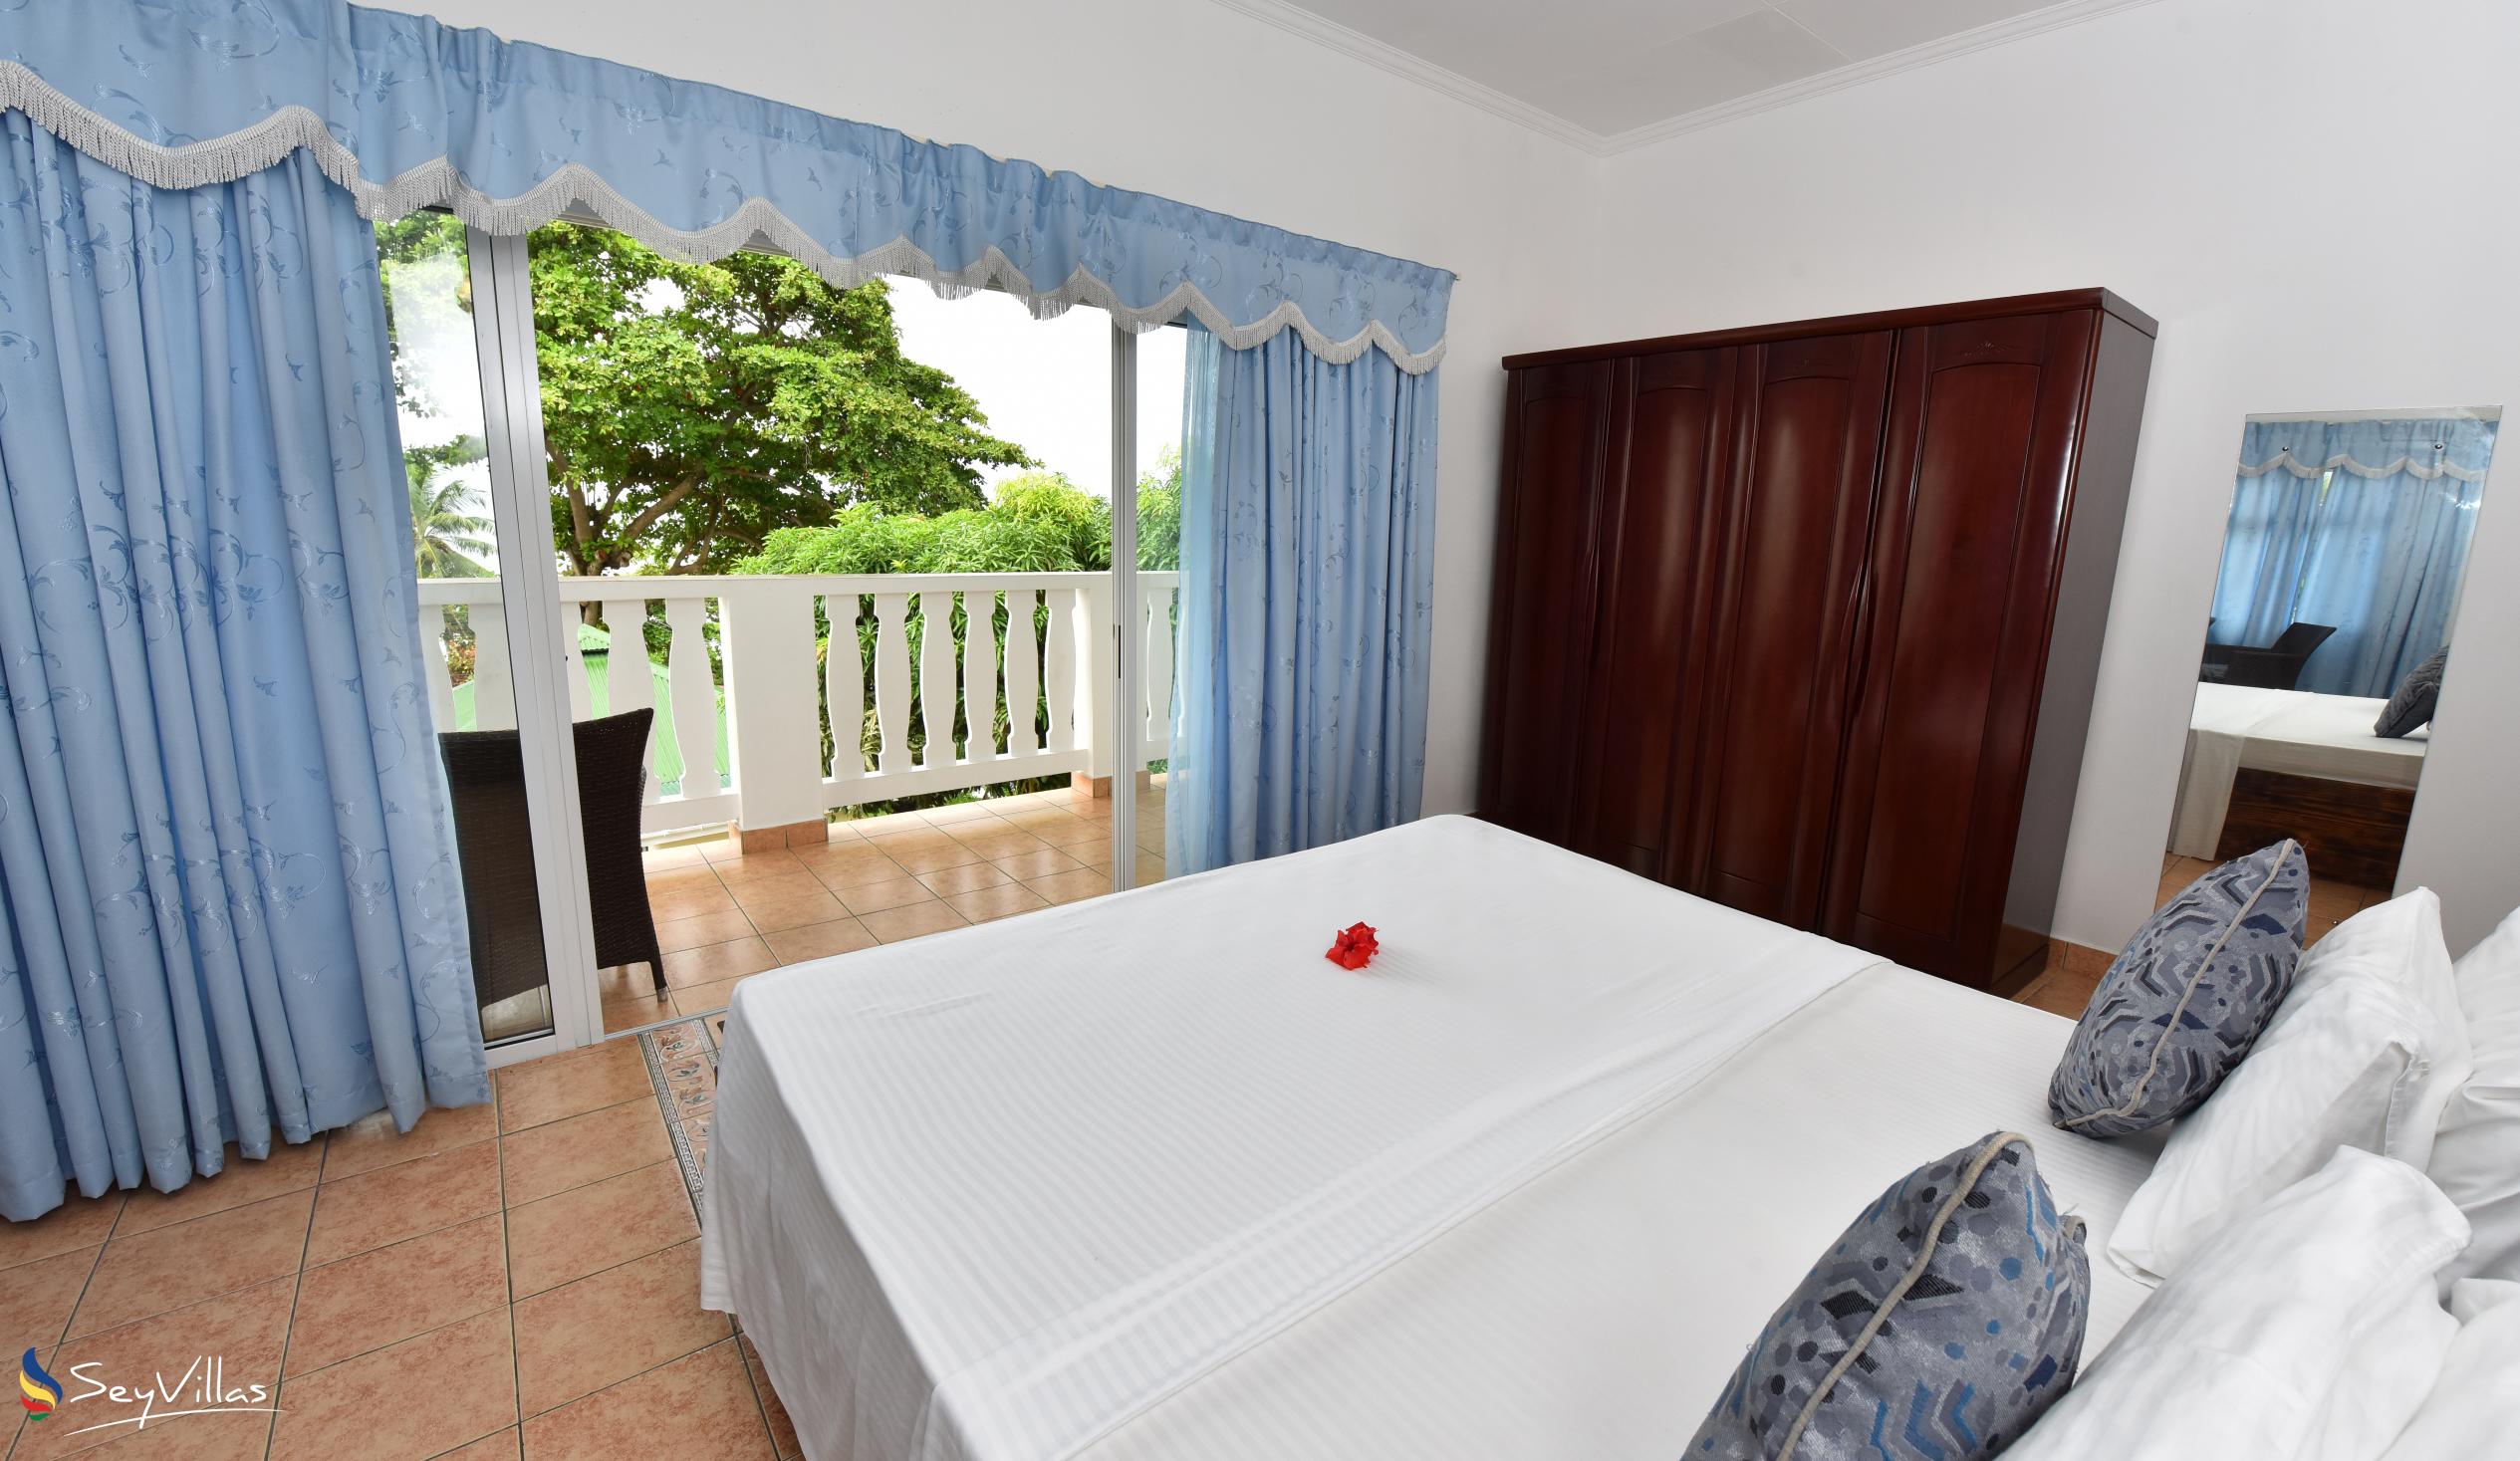 Photo 15: The Diver's Lodge - Standard Room (First Floor) - Mahé (Seychelles)